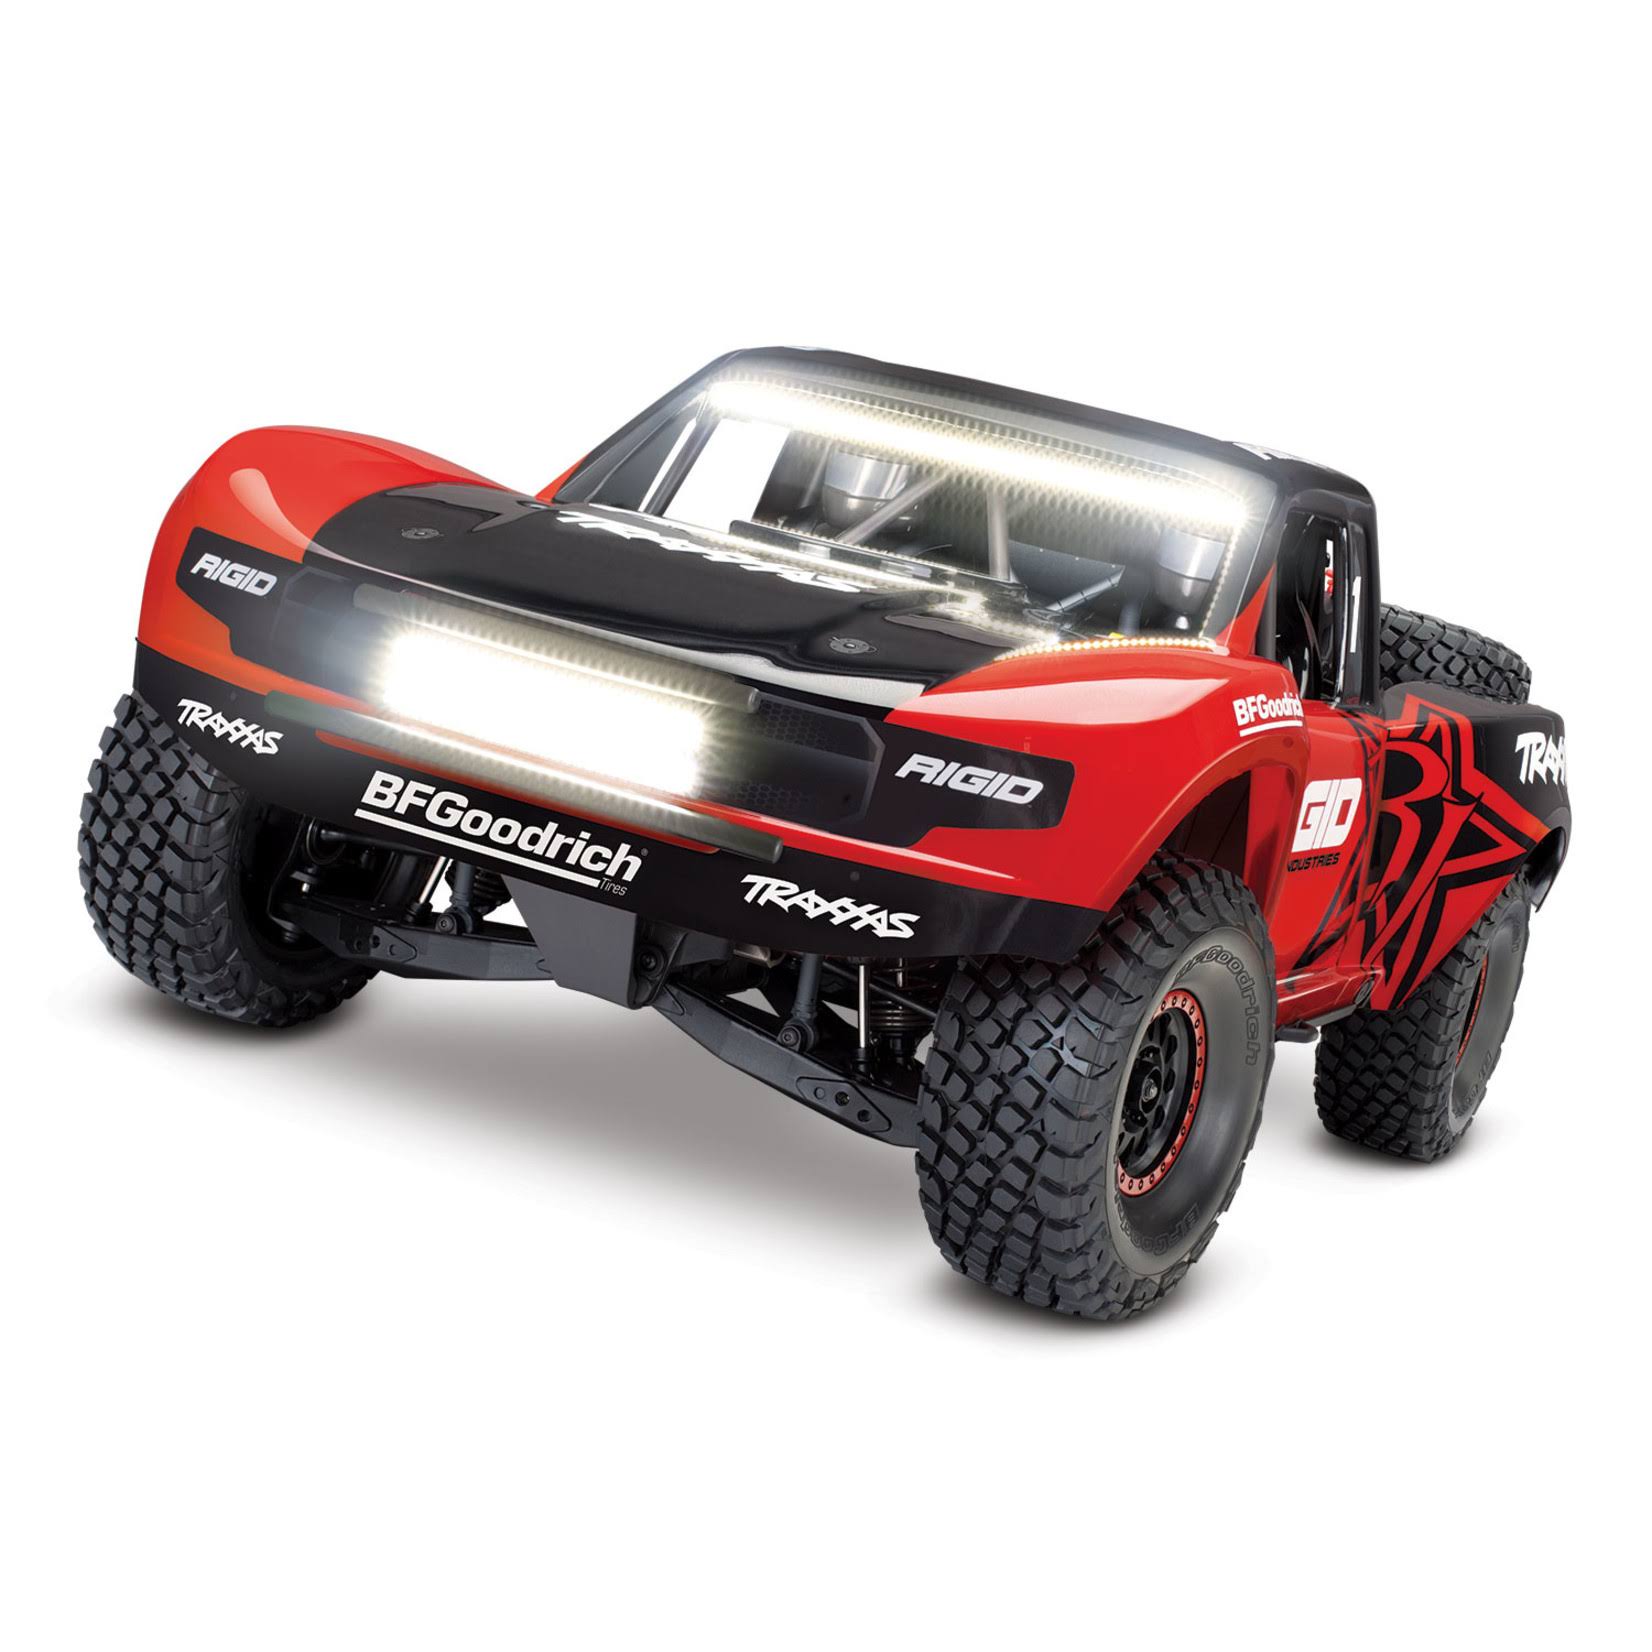 Traxxas 85086-4-RGD Unlimited Desert Racer: 4wd Electric Race Truck